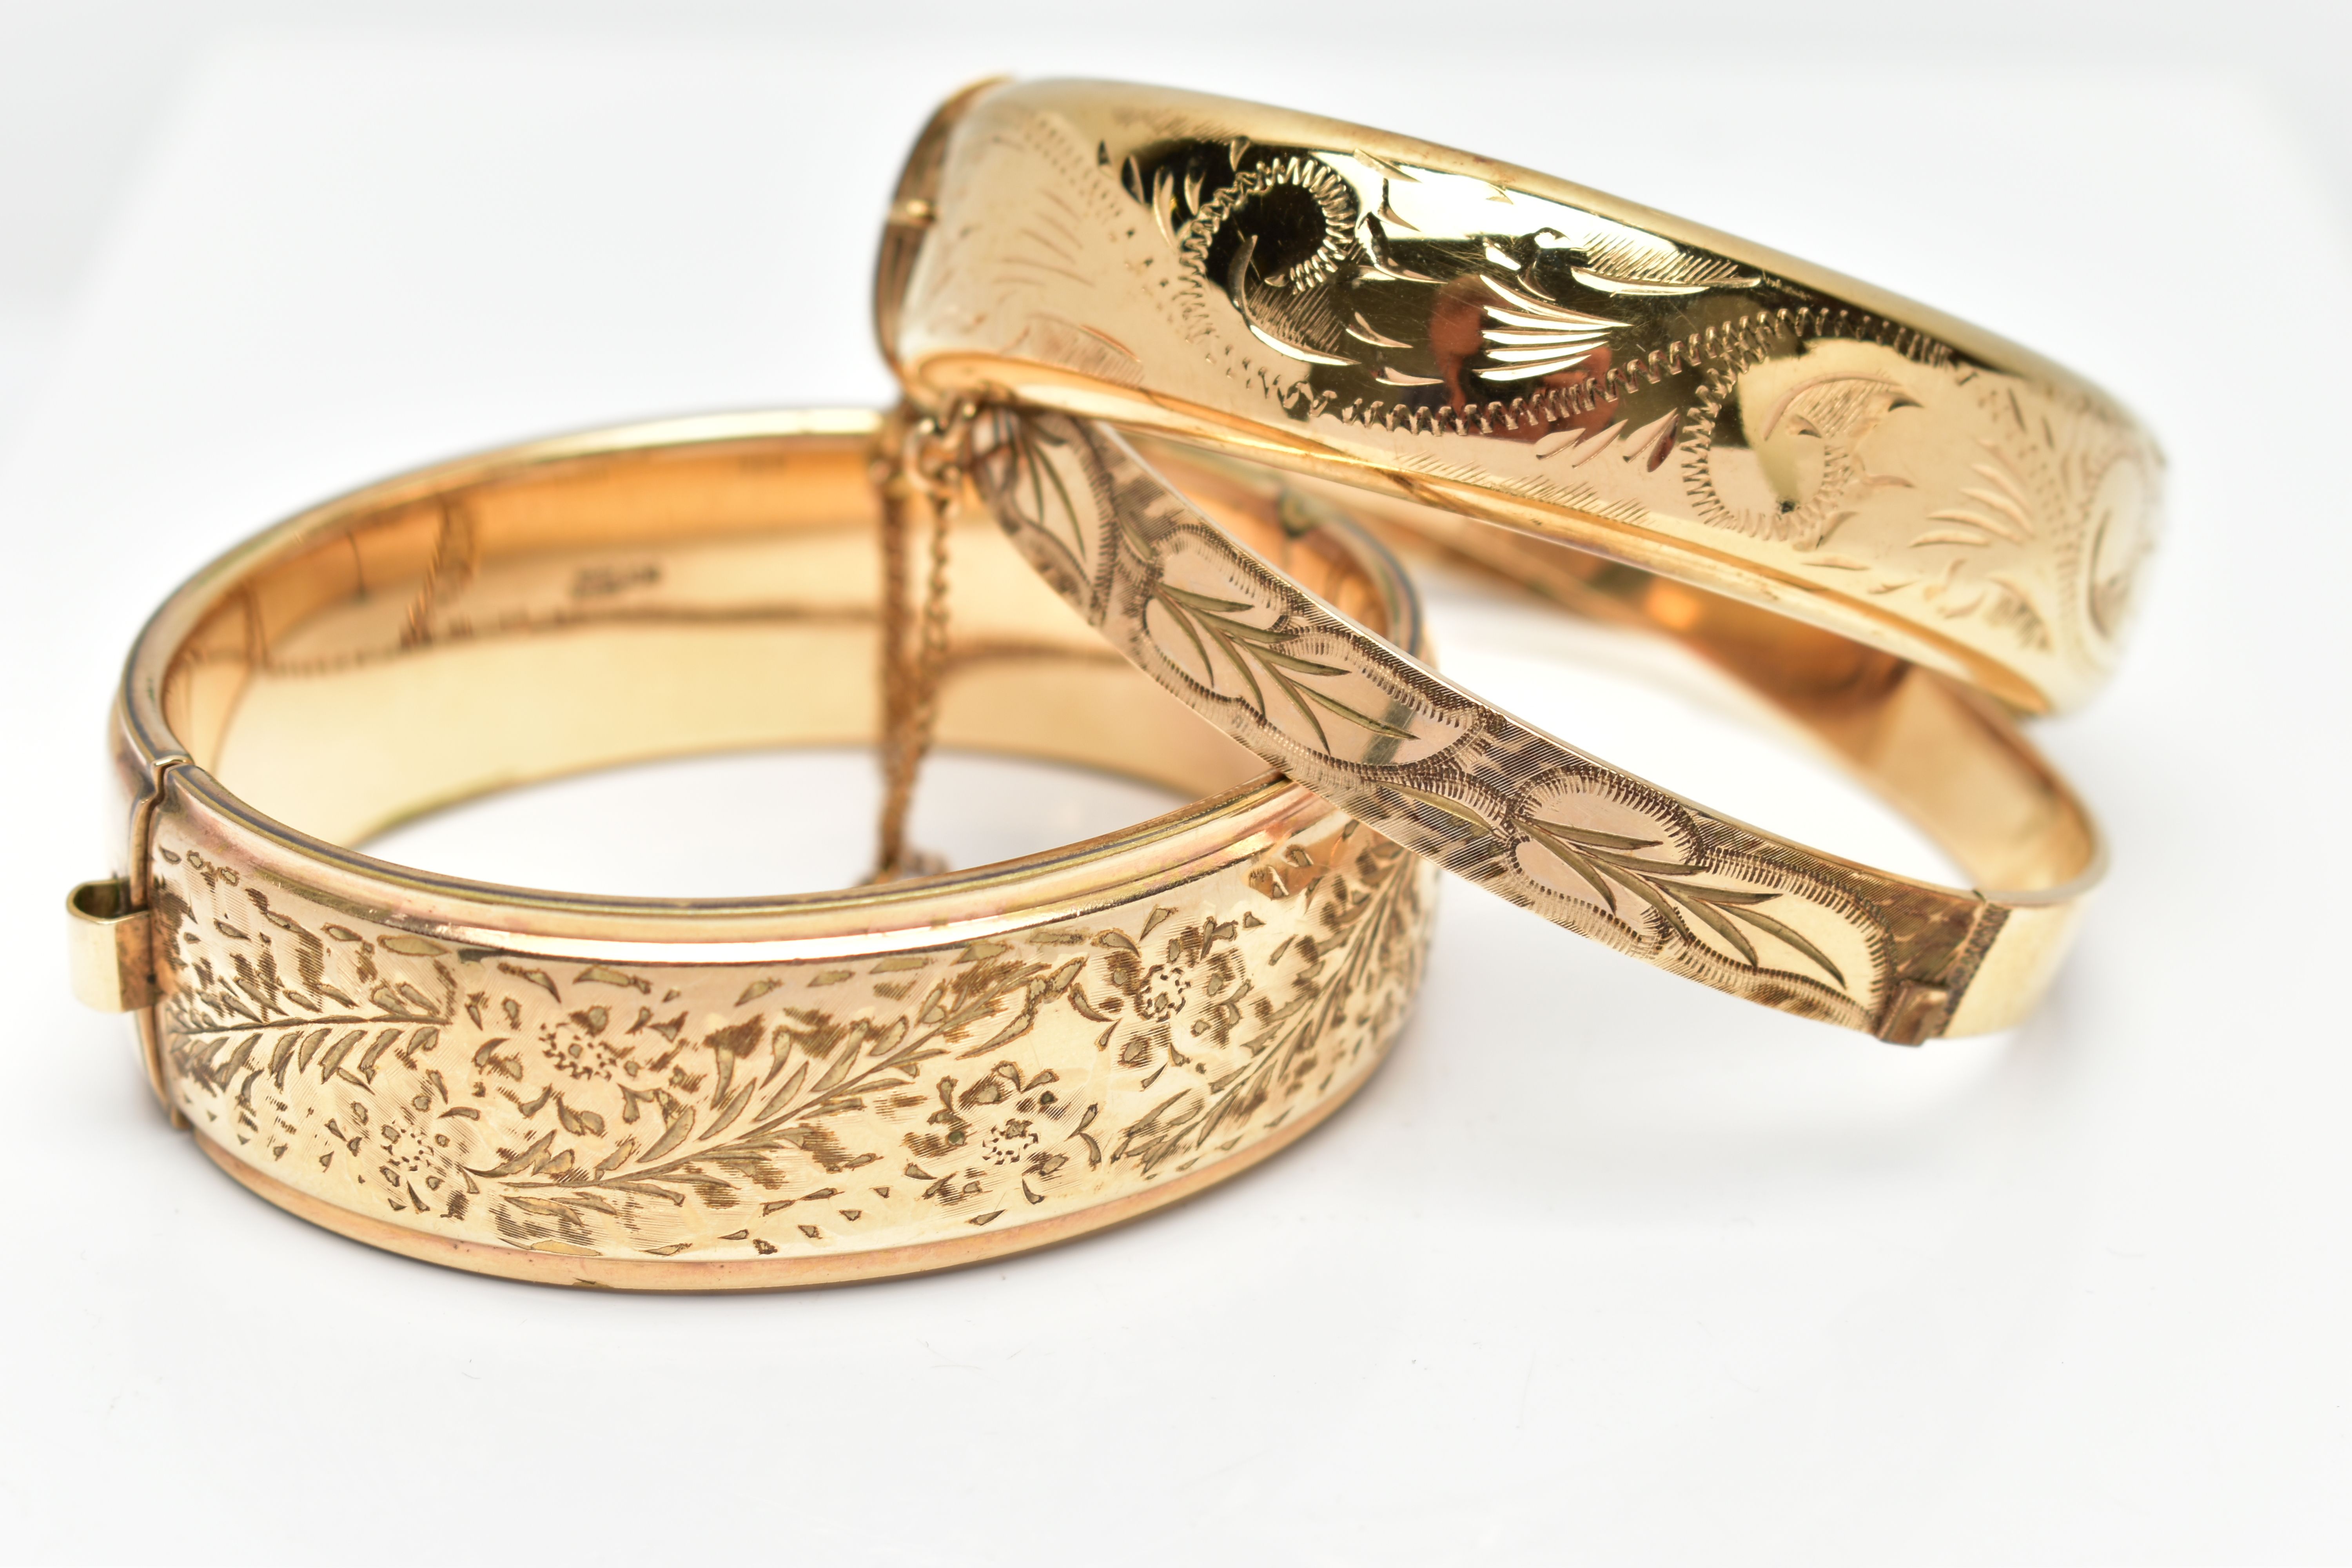 THREE YELLOW METAL HINGED BANGLES, each with a textured and engraved foliate panel design, to the